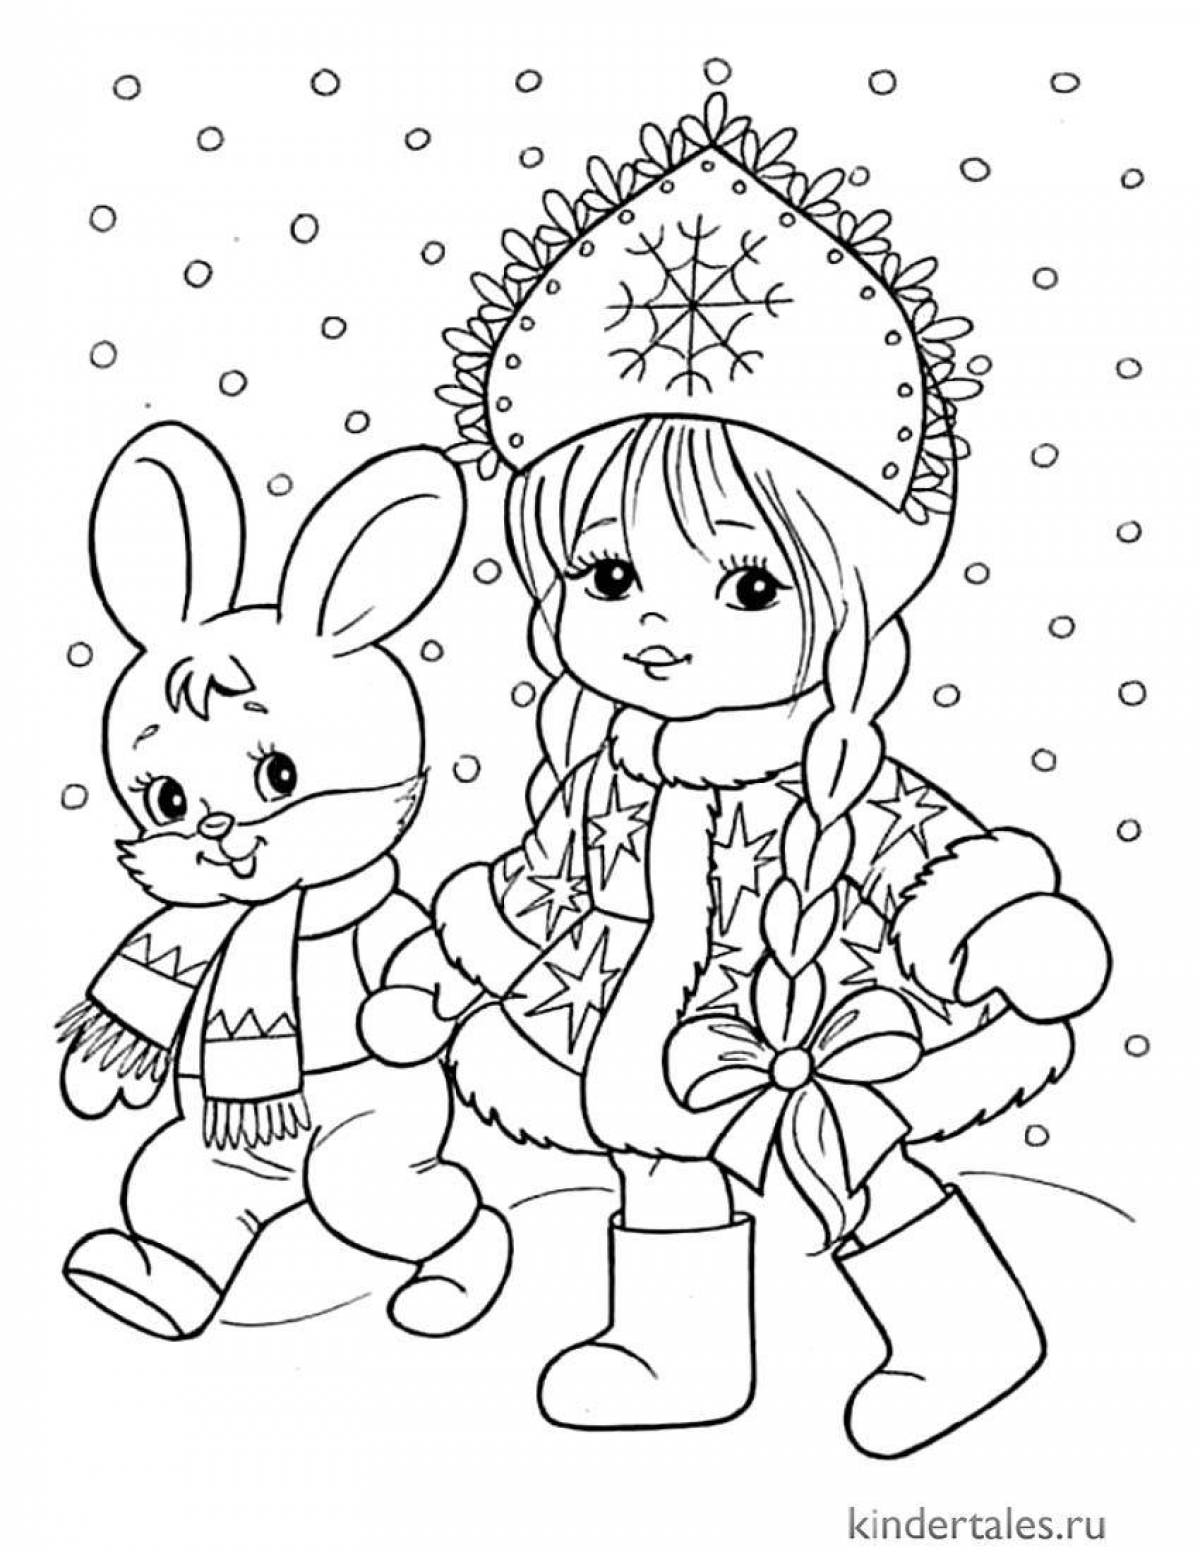 Exuberant Christmas coloring book for 8-9 year olds